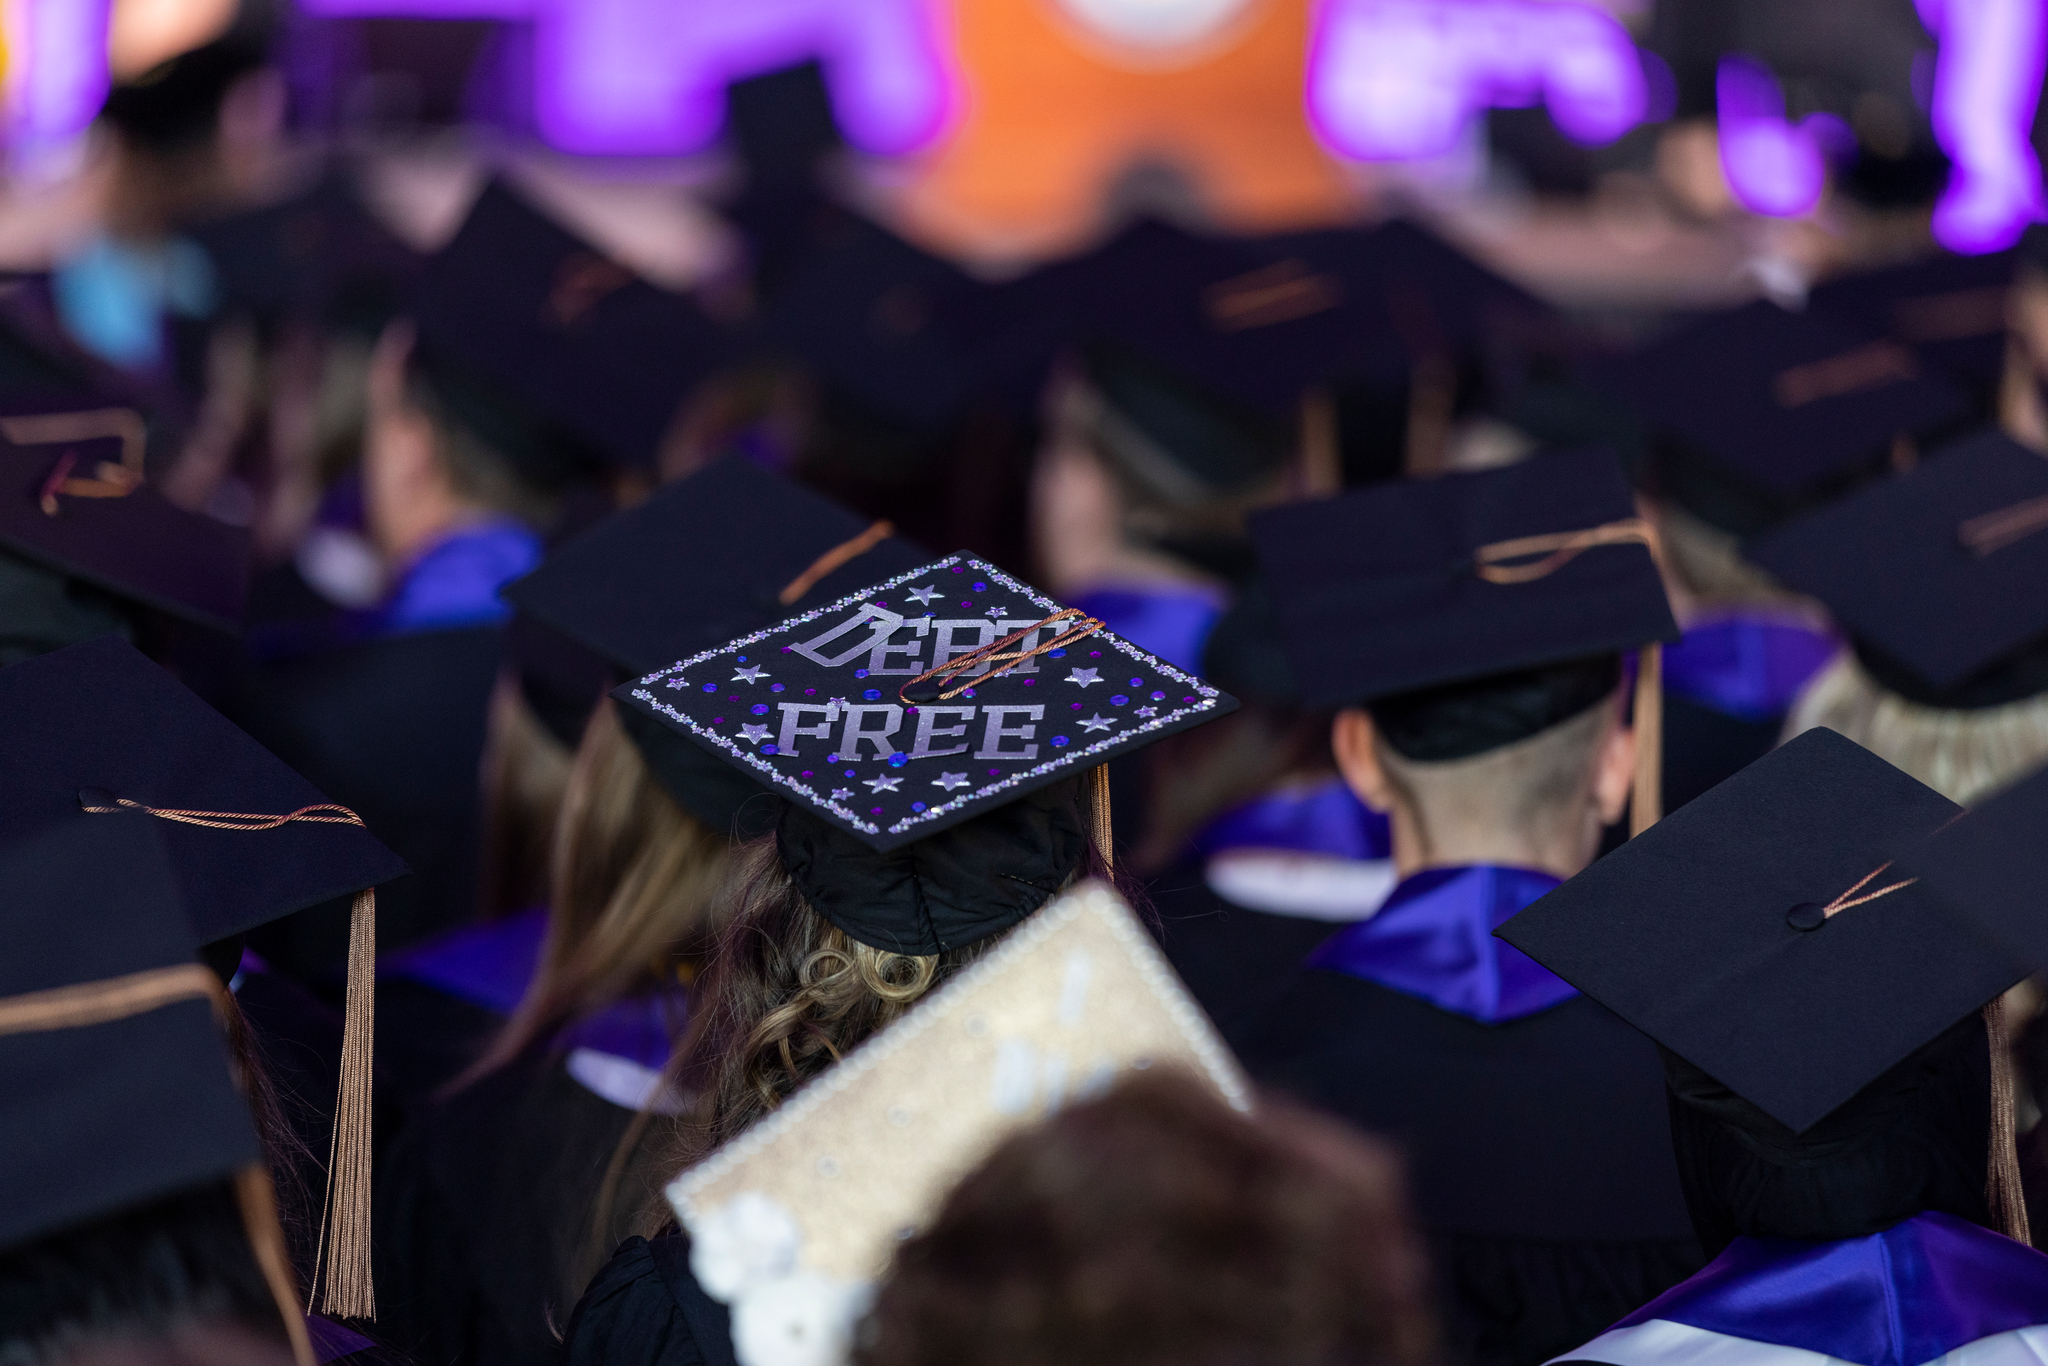 Student’s cap at the 2023 Opus College of Business Undergraduate Commencement Ceremony that says "Debt Free"